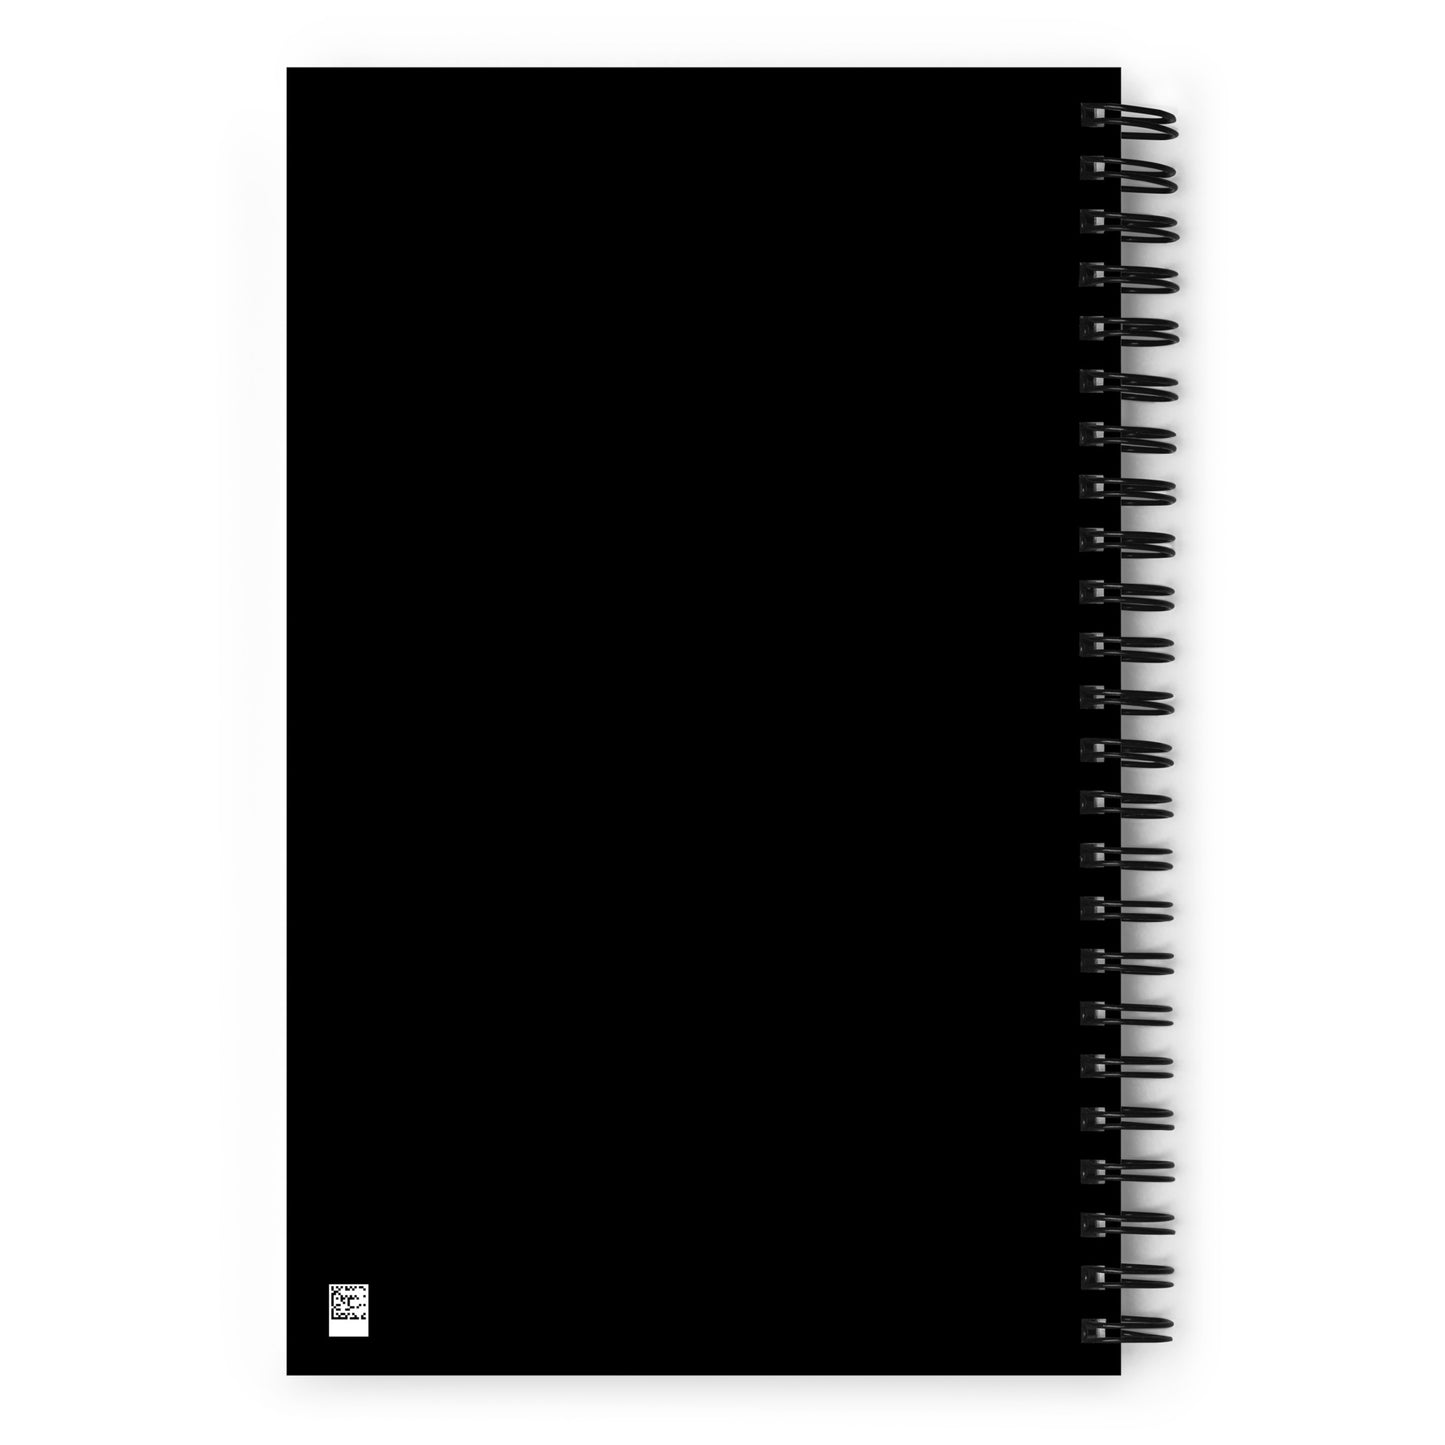 The "KARM" Notebook